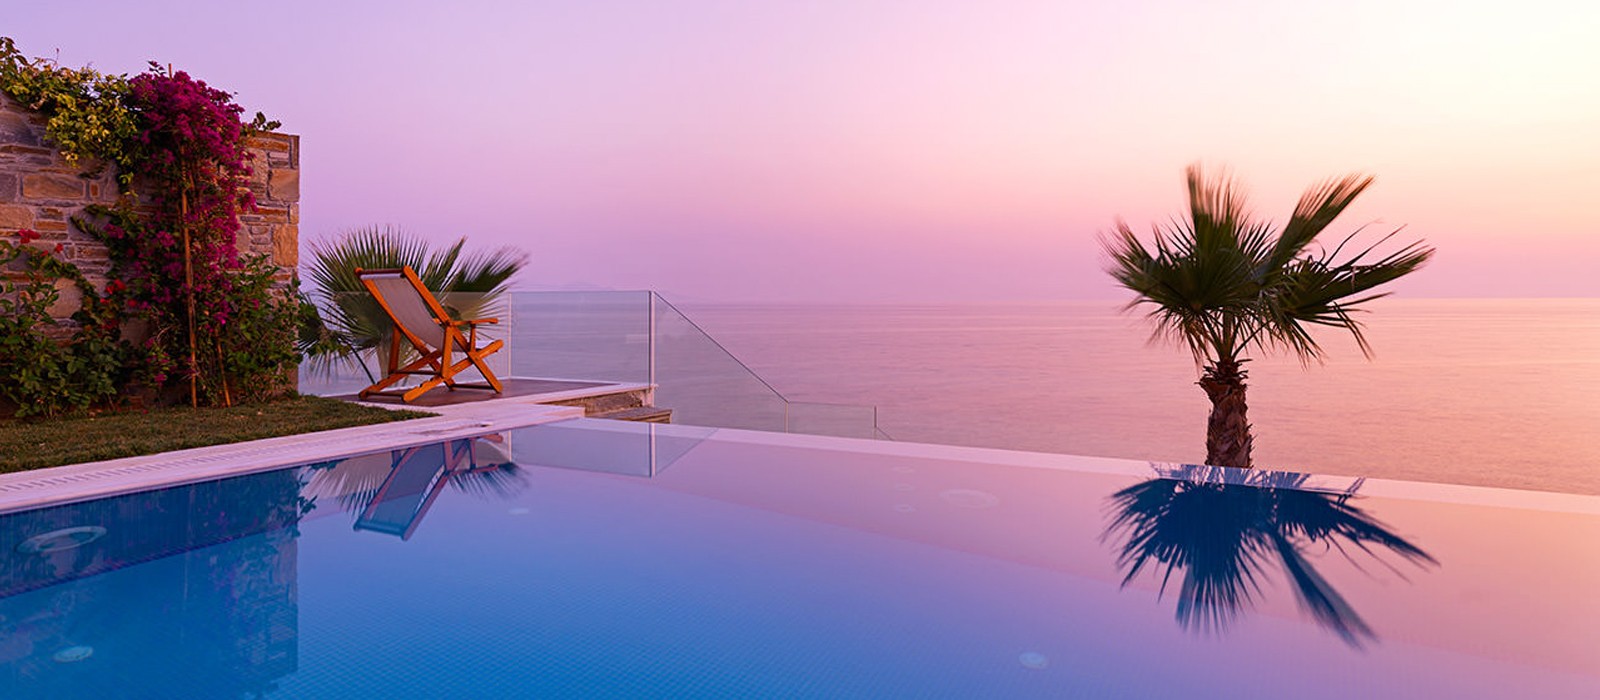 header - porto zante villas and spa - luxury greece holiday packages